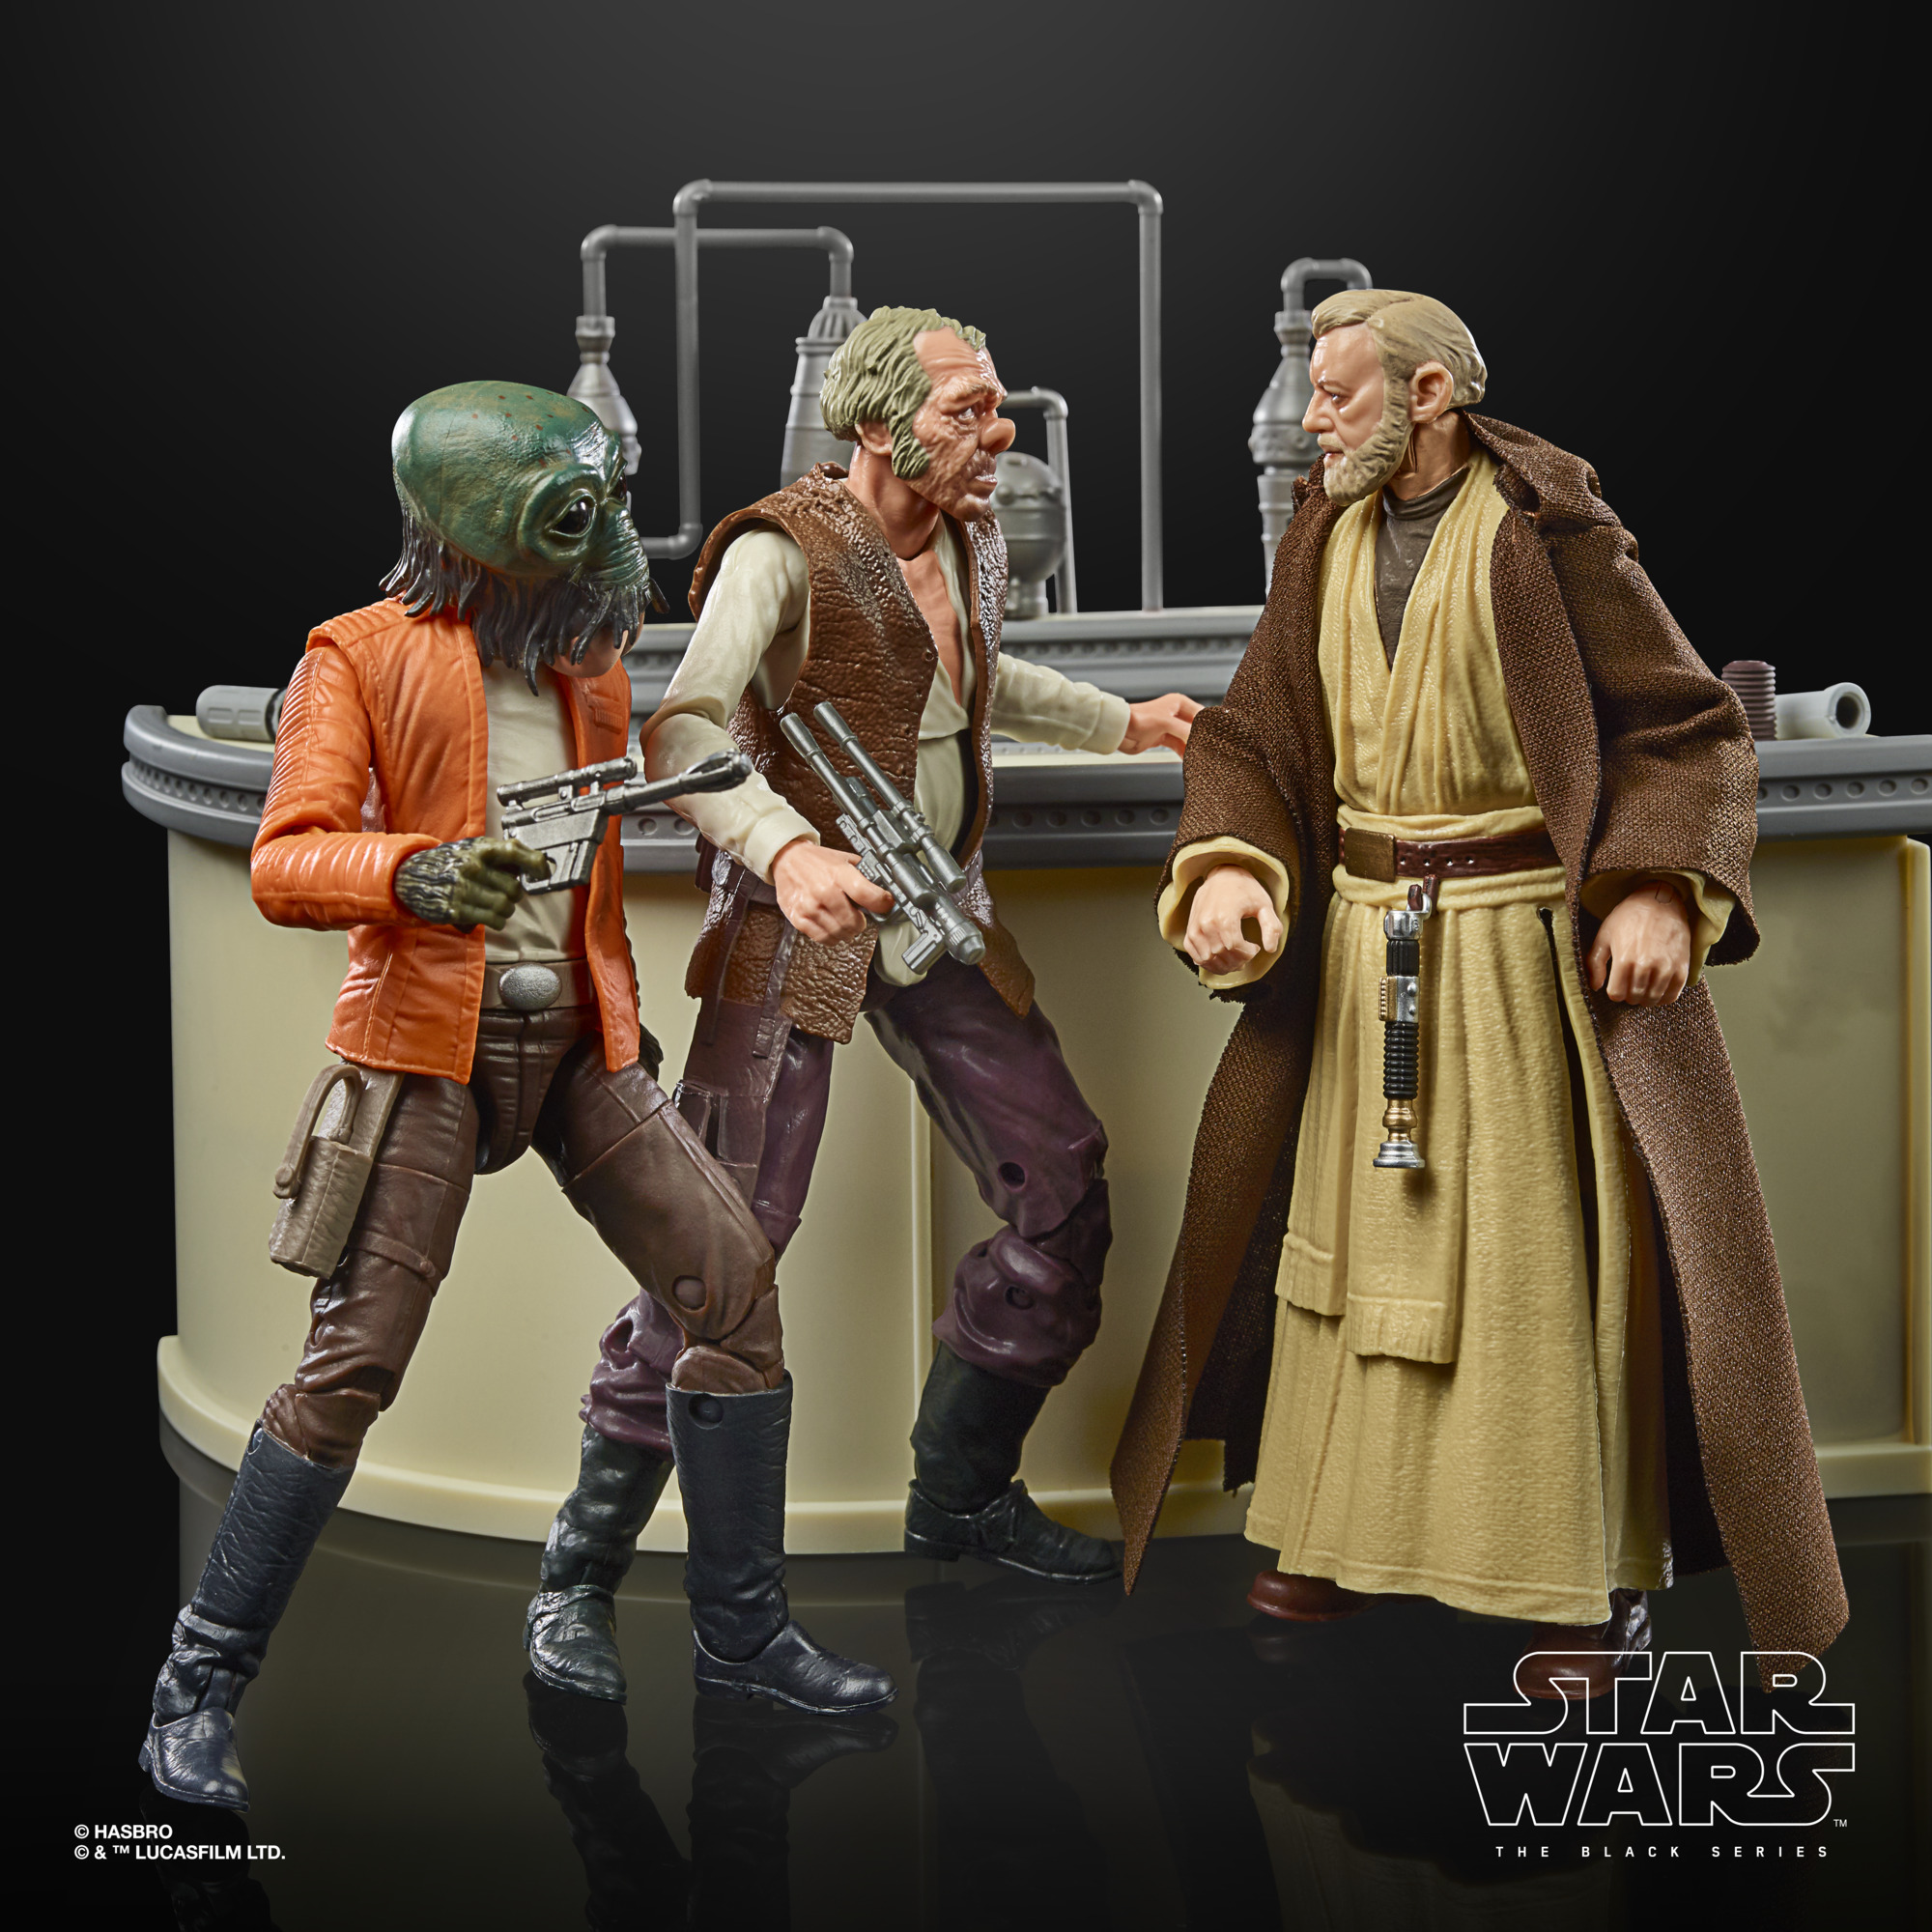 STAR-WARS-THE-BLACK-SERIES-THE-POWER-OF-THE-FORCE-CANTINA-SHOWDOWN-Playset-oop-17